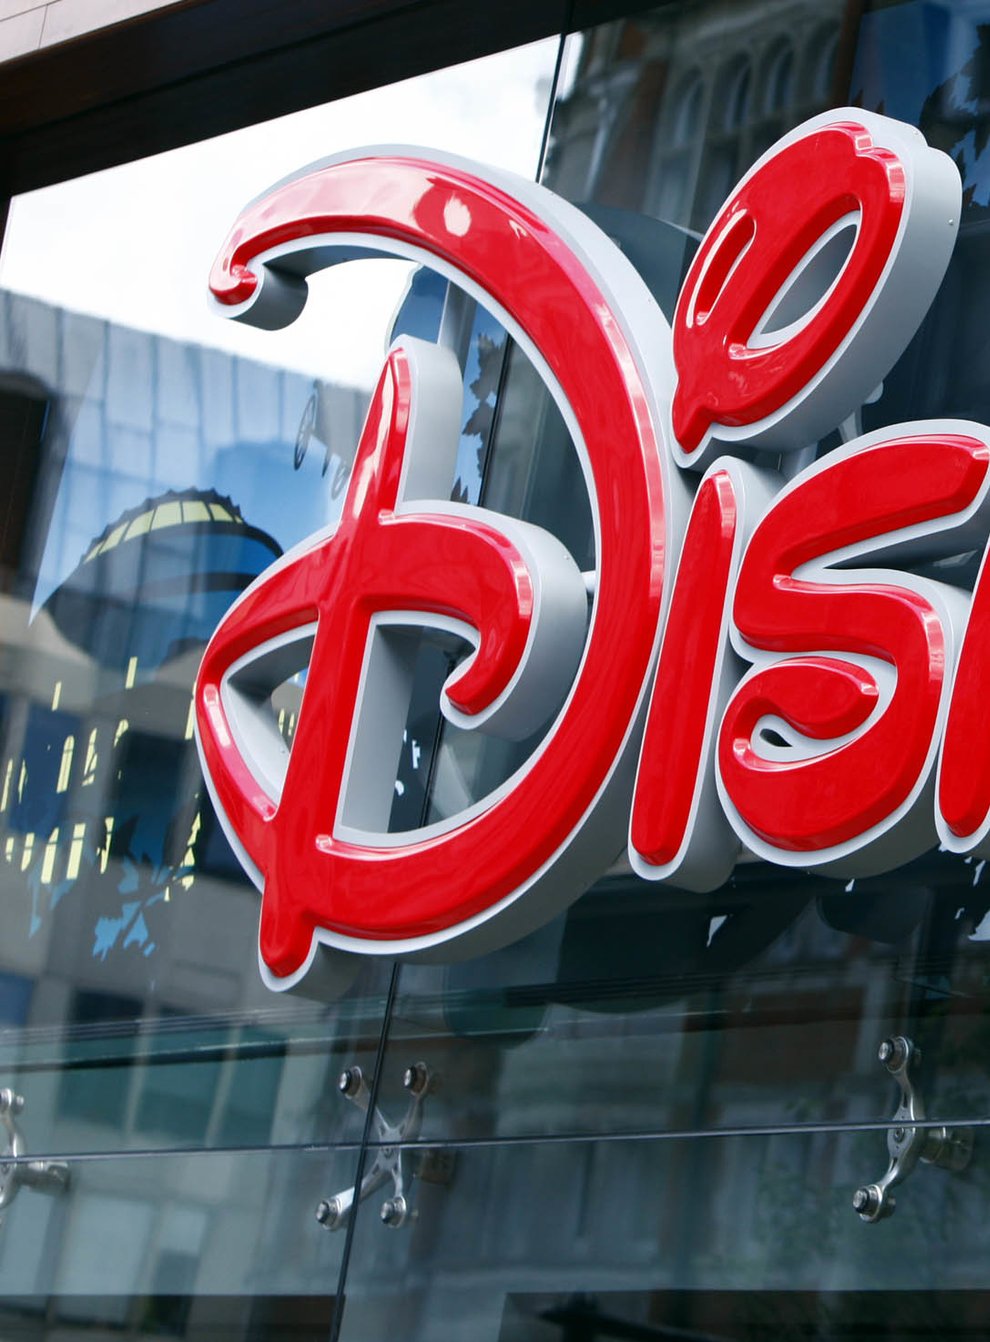 Disneyland Paris will reopen next month with a series of new health and safety measures (Sean Dempsey/PA)